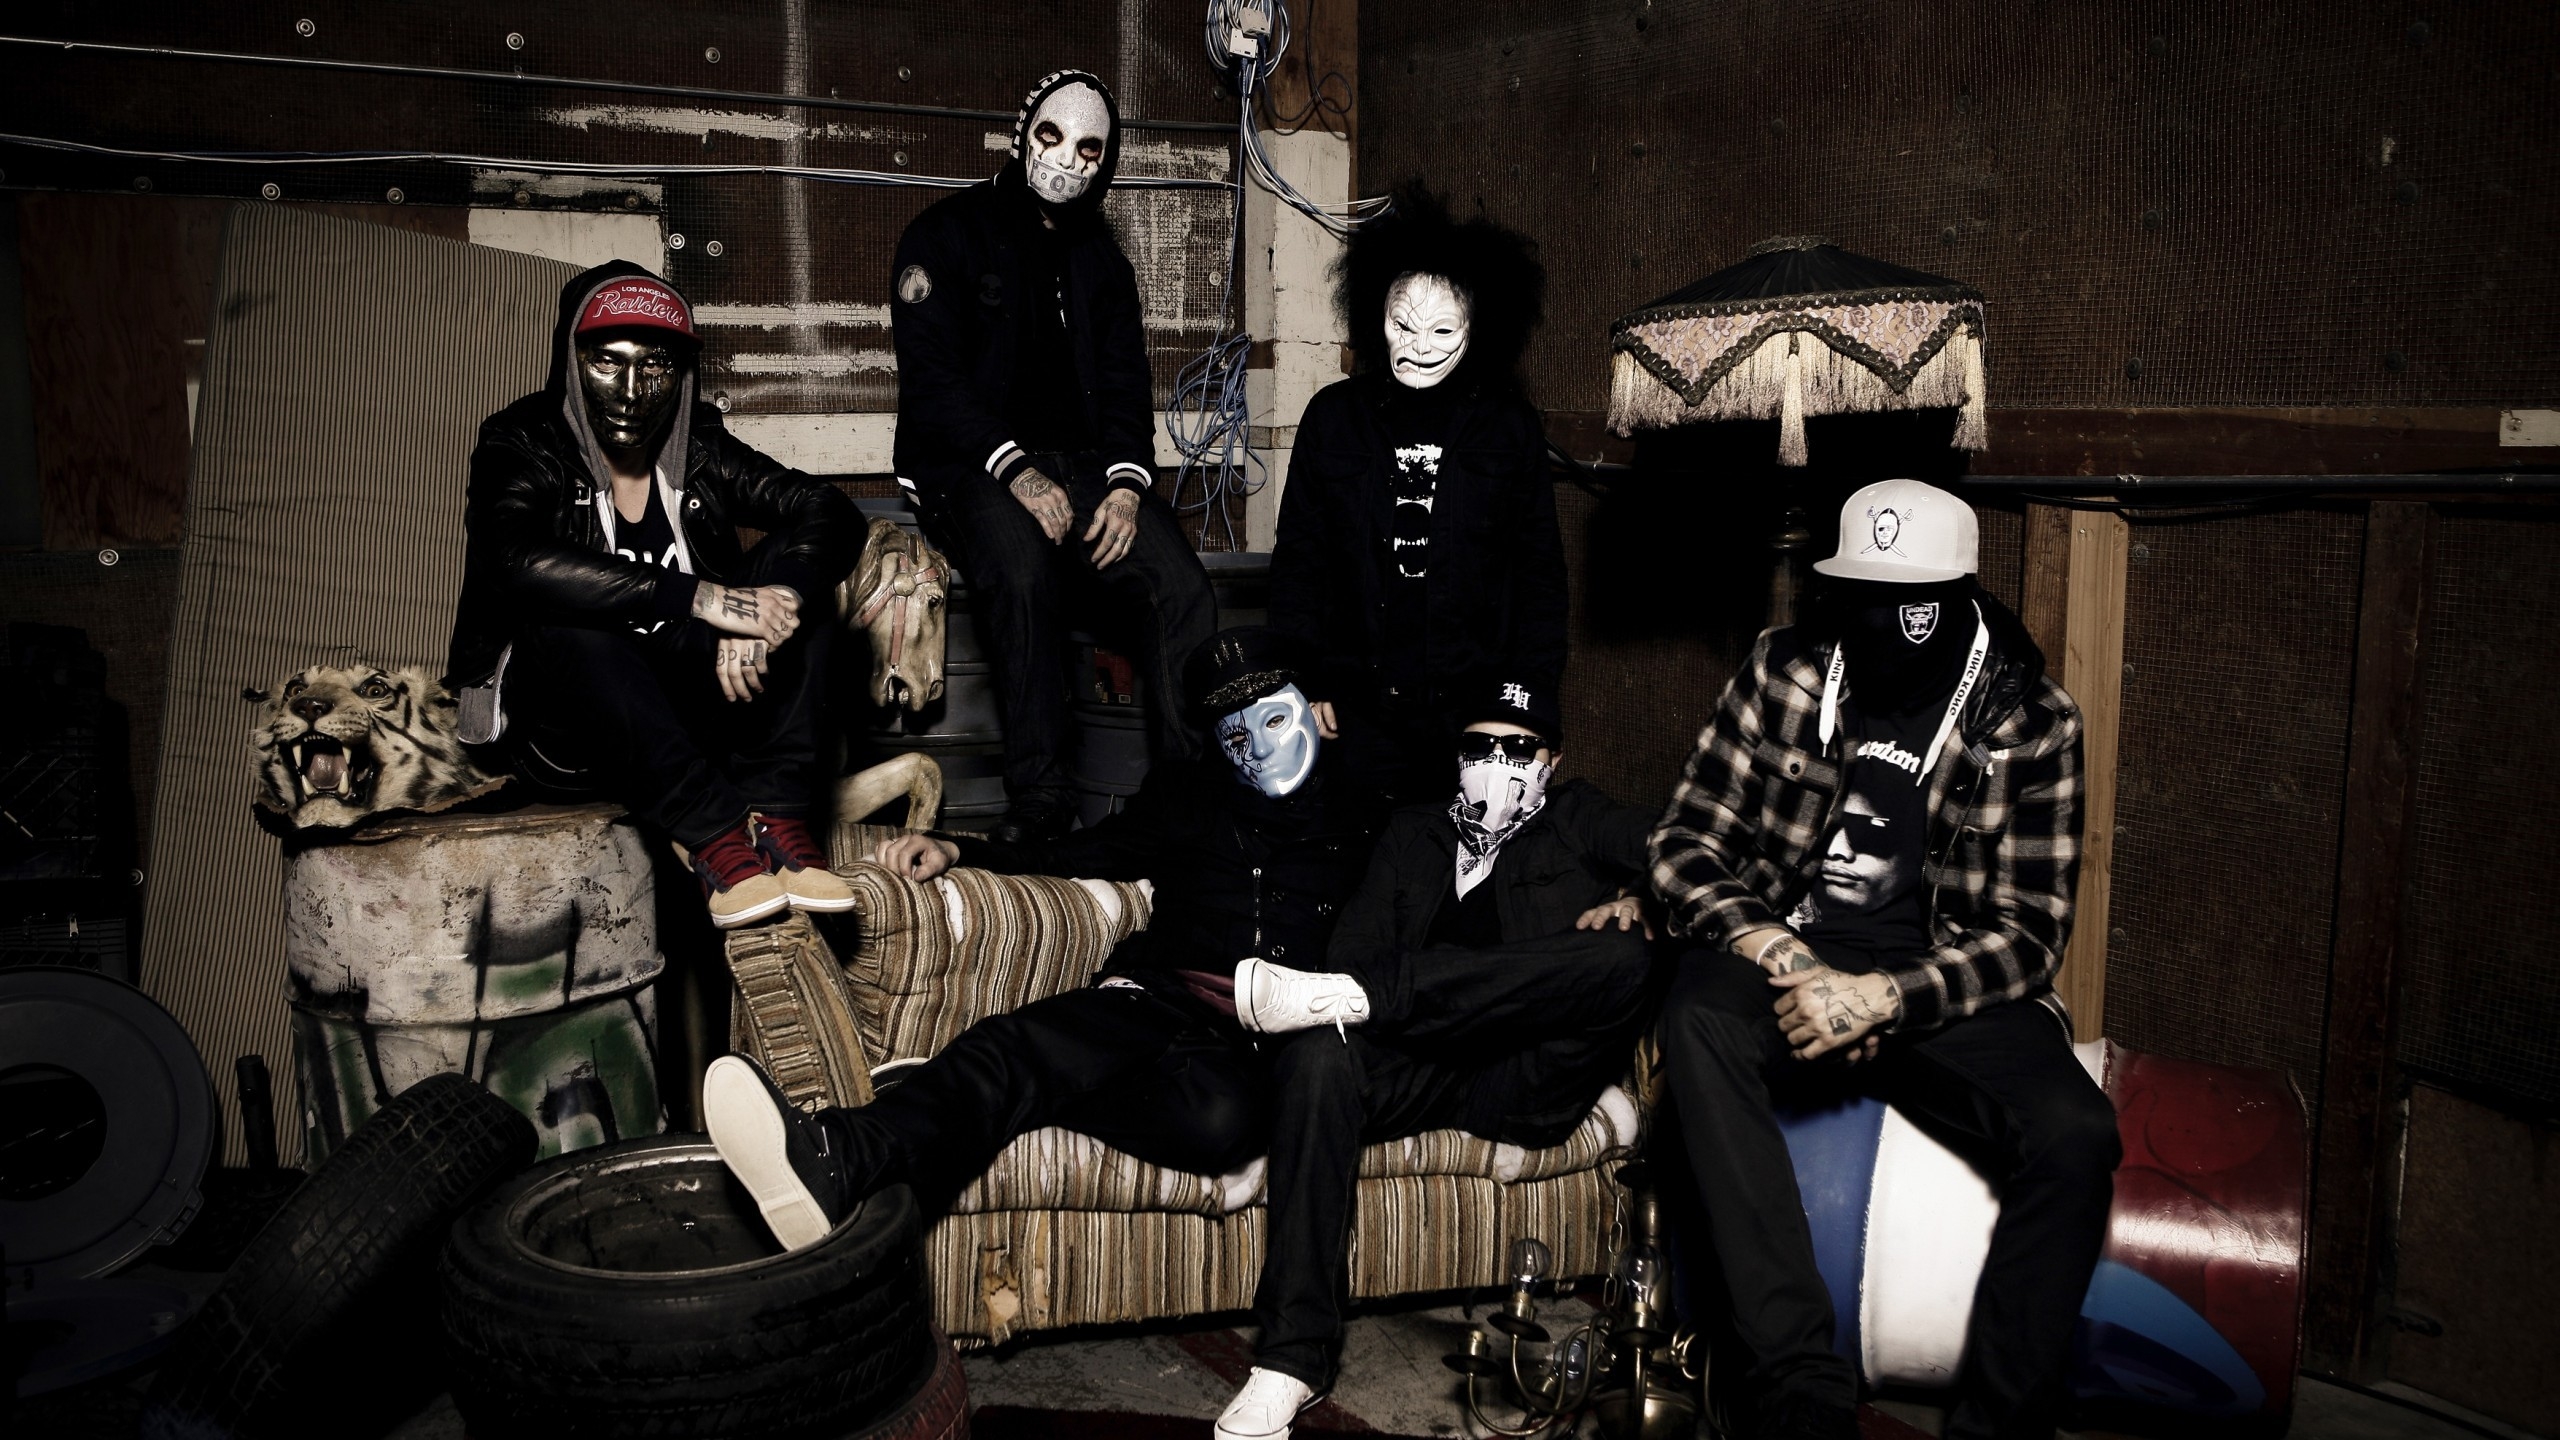 Hollywood Undead Mask for 2560x1440 HDTV resolution